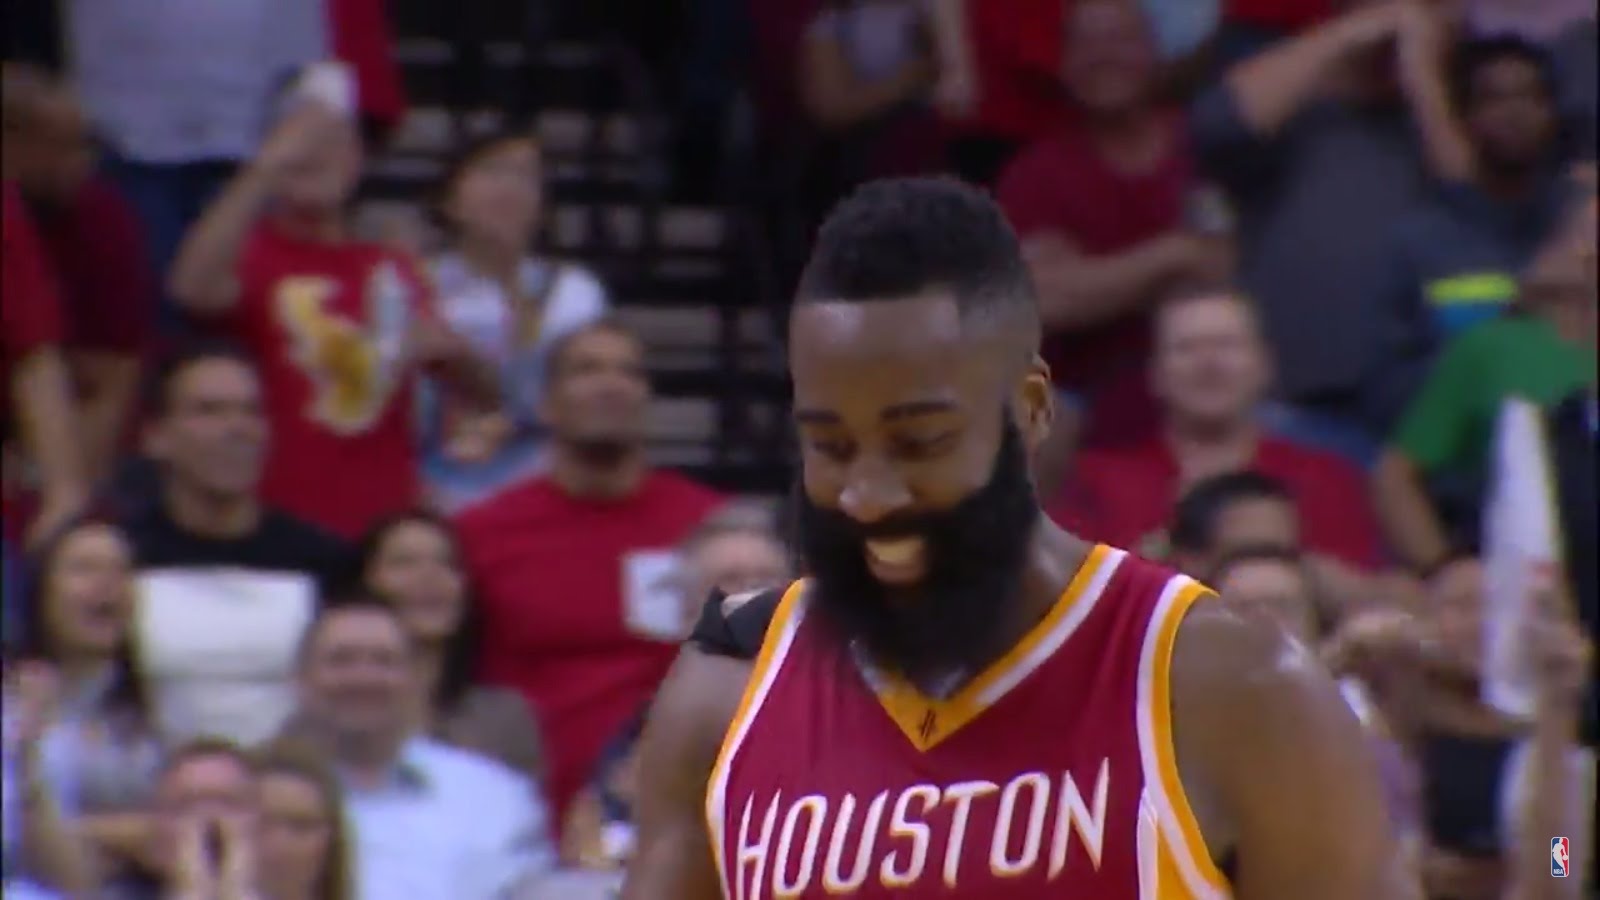 James Harden drops a career high 50 points